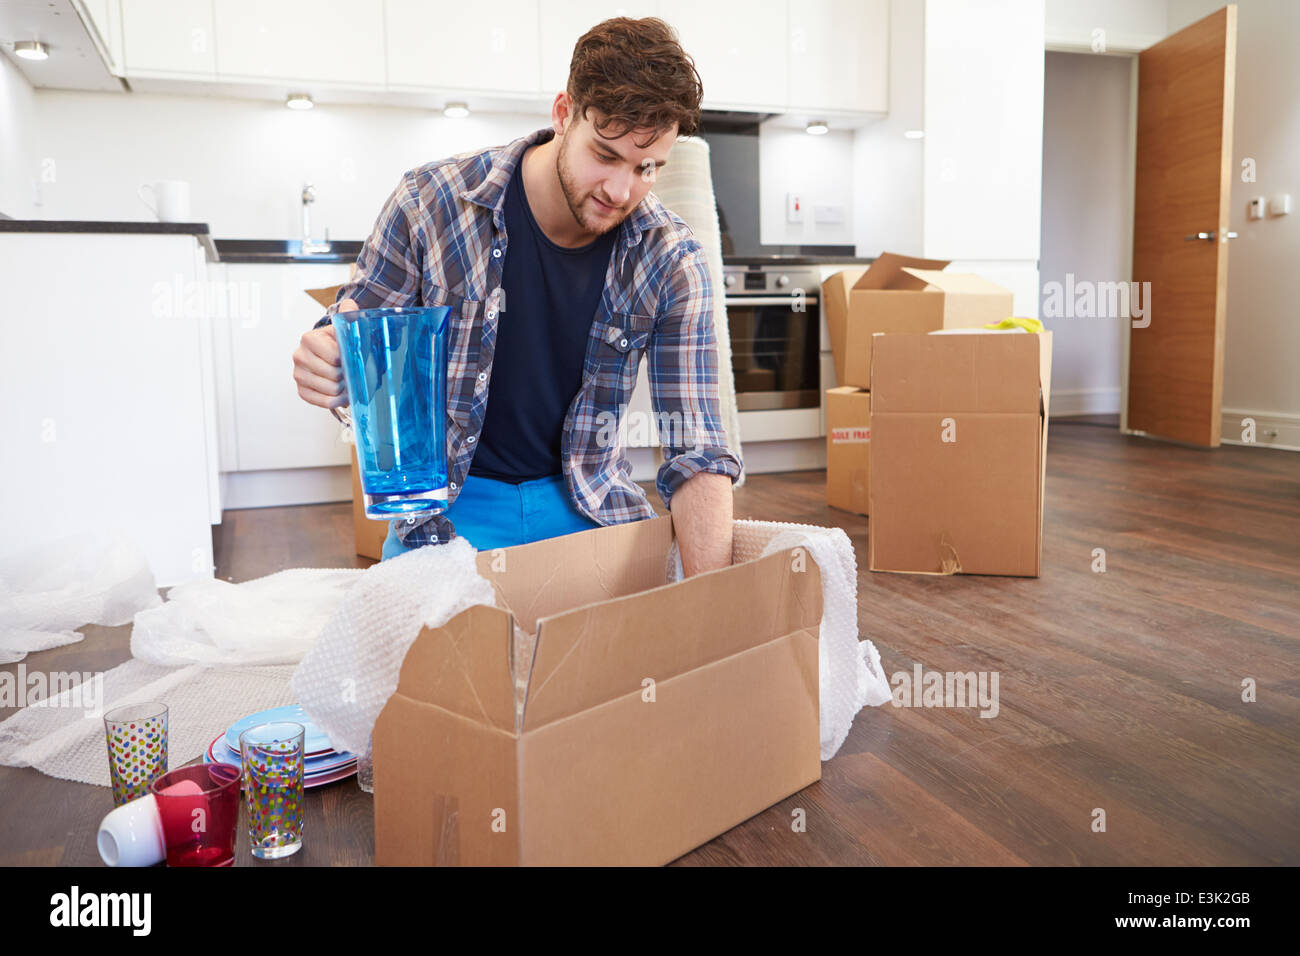 Man Moving Into New Home And Unpacking Boxes Stock Photo